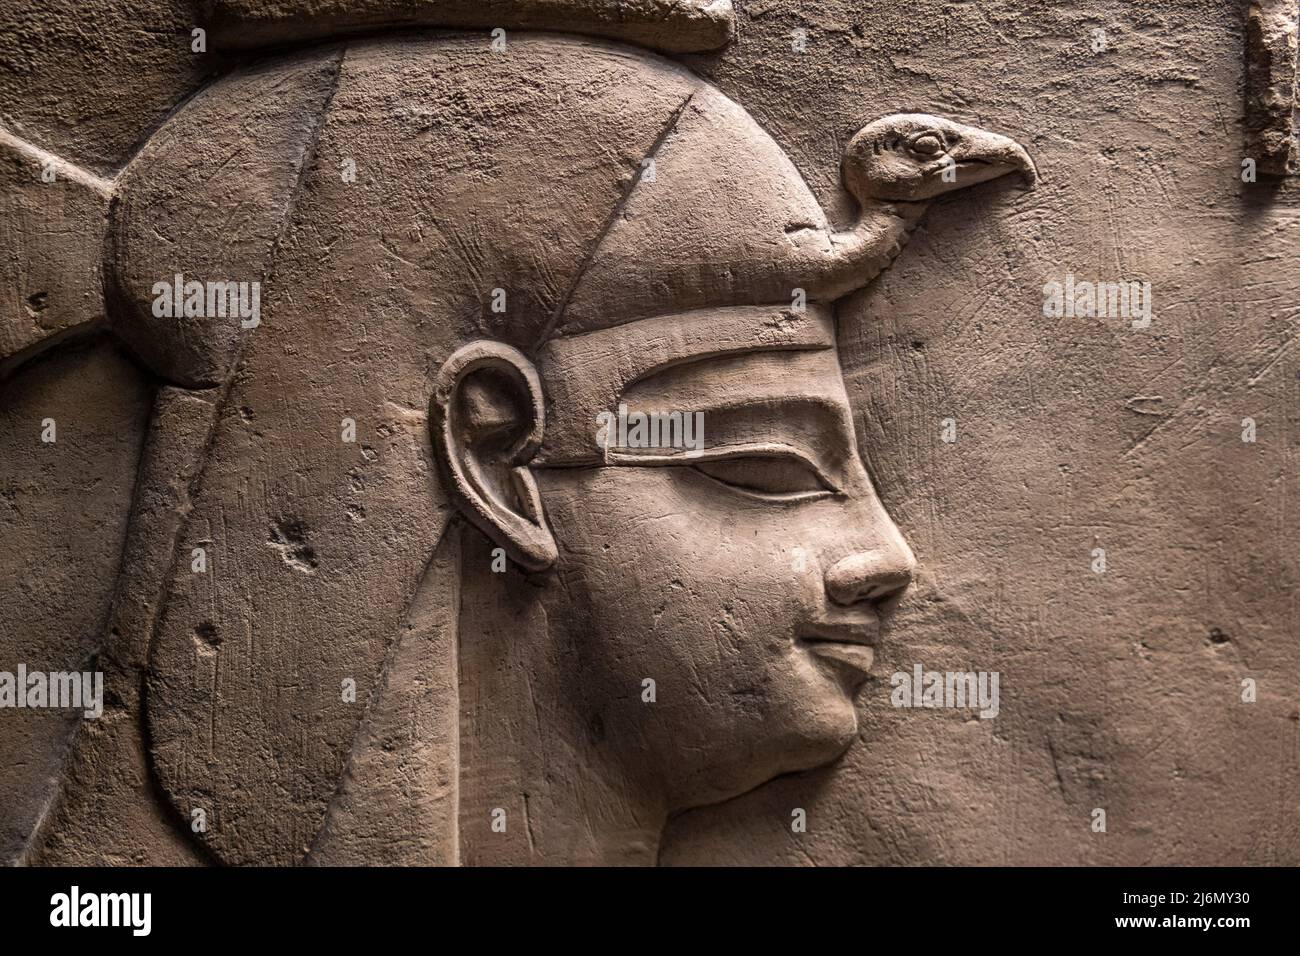 Ptolemaic kingdom hi-res stock photography and images - Alamy